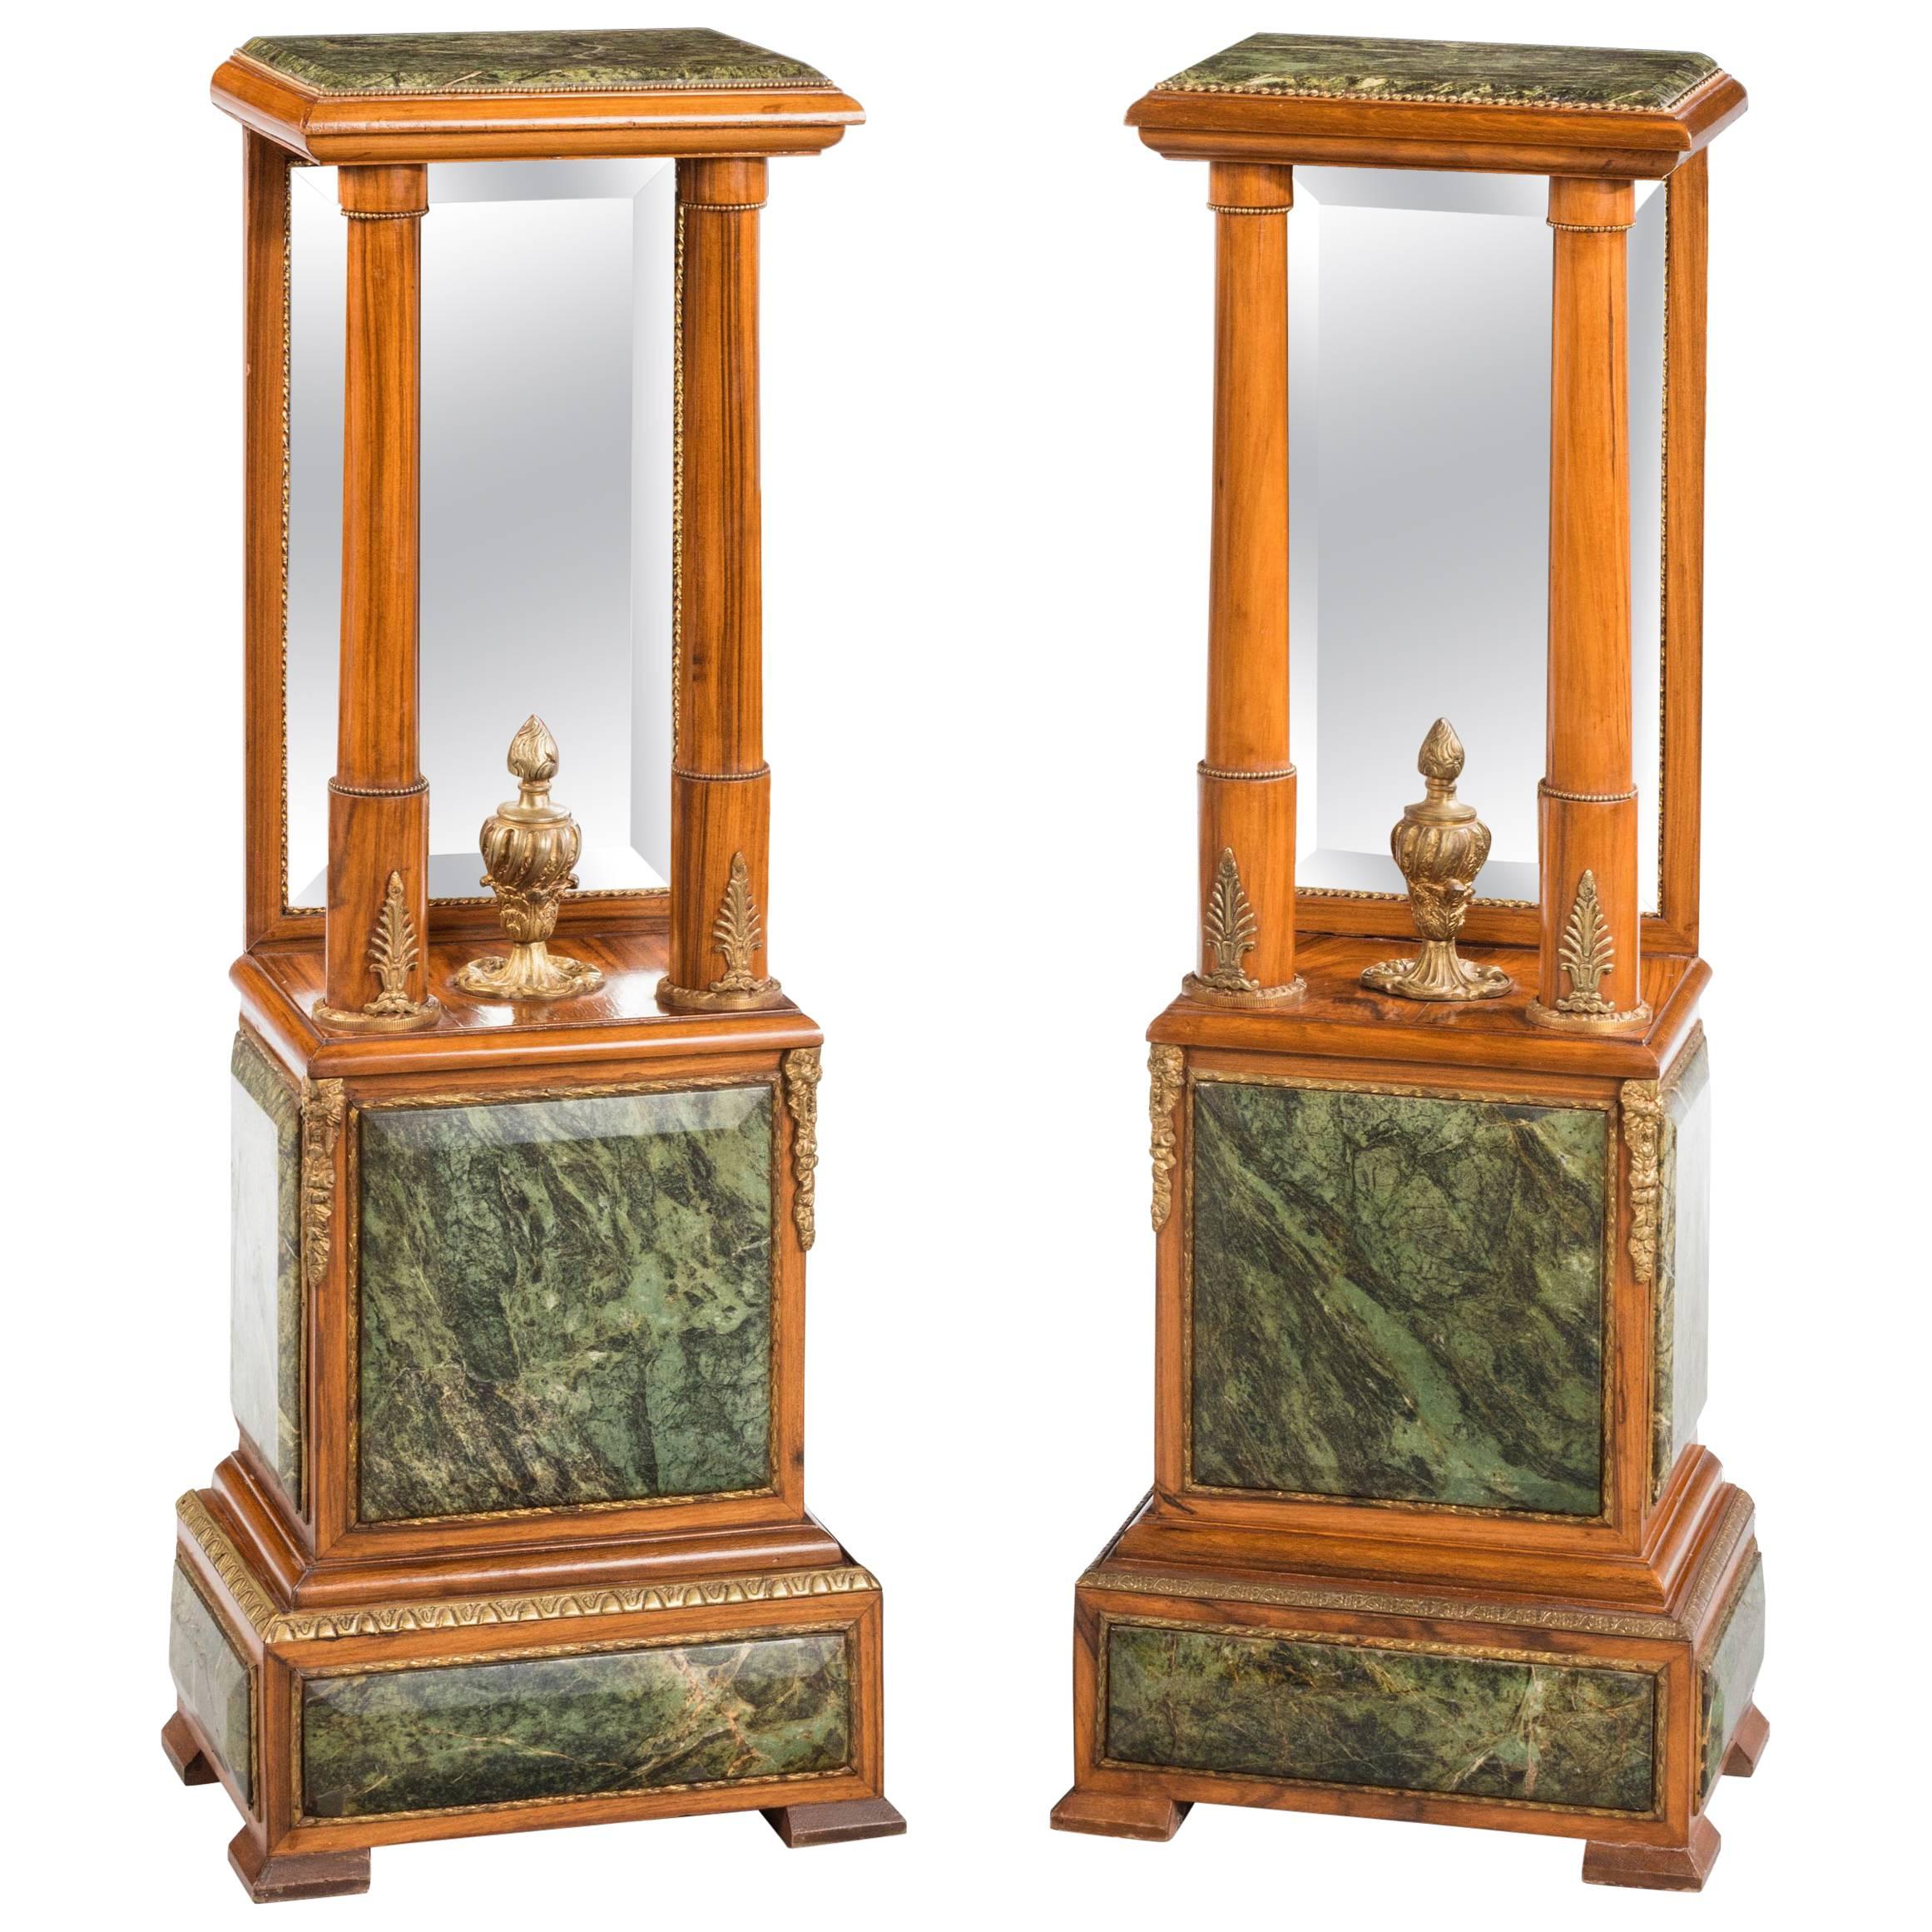 Pair of Louis XVI Style Marble Mounted Stands